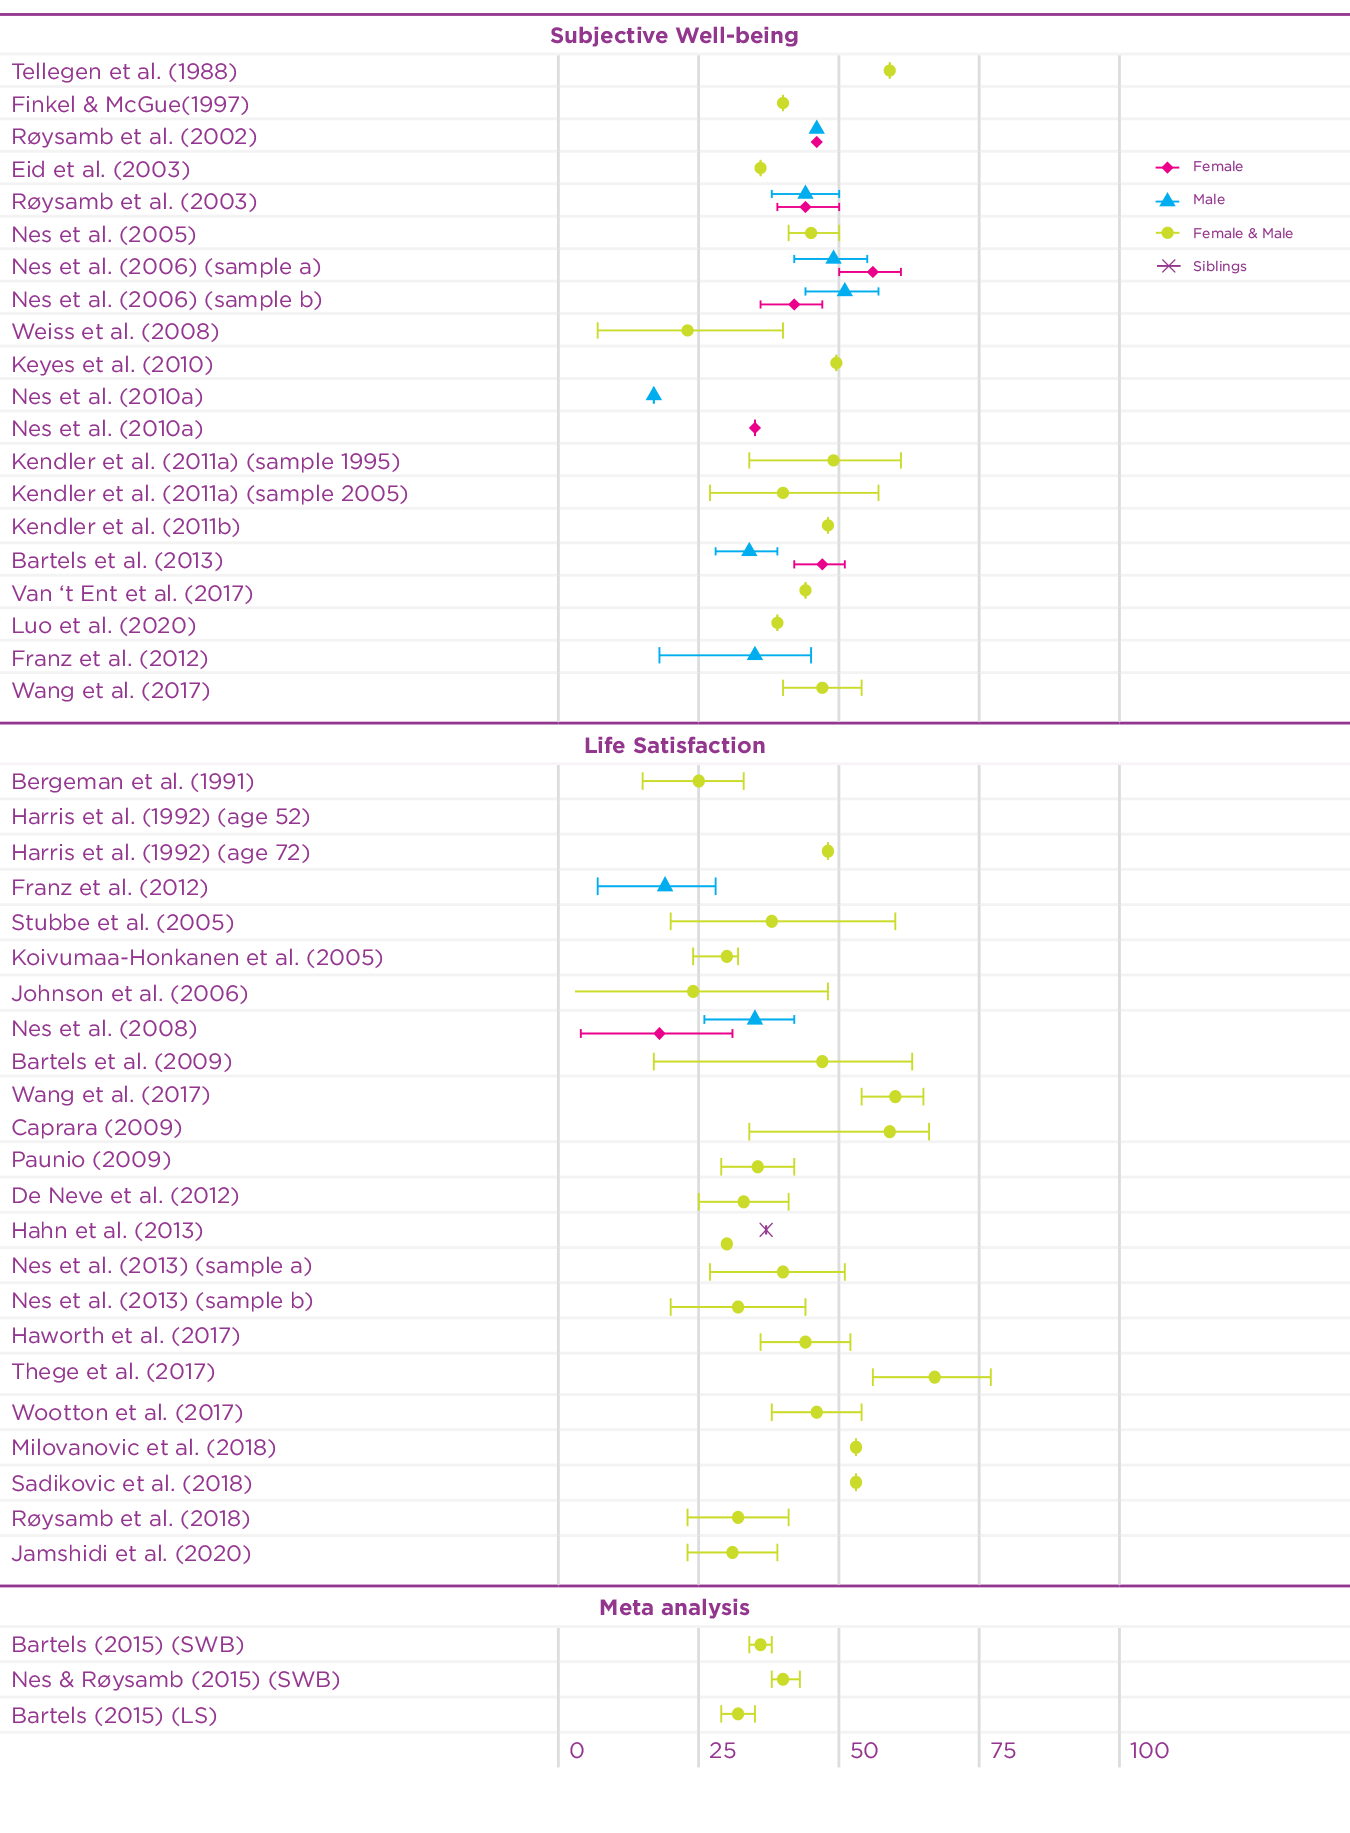 Figure 5.1: Overview of twin-based heritability estimates of well-being